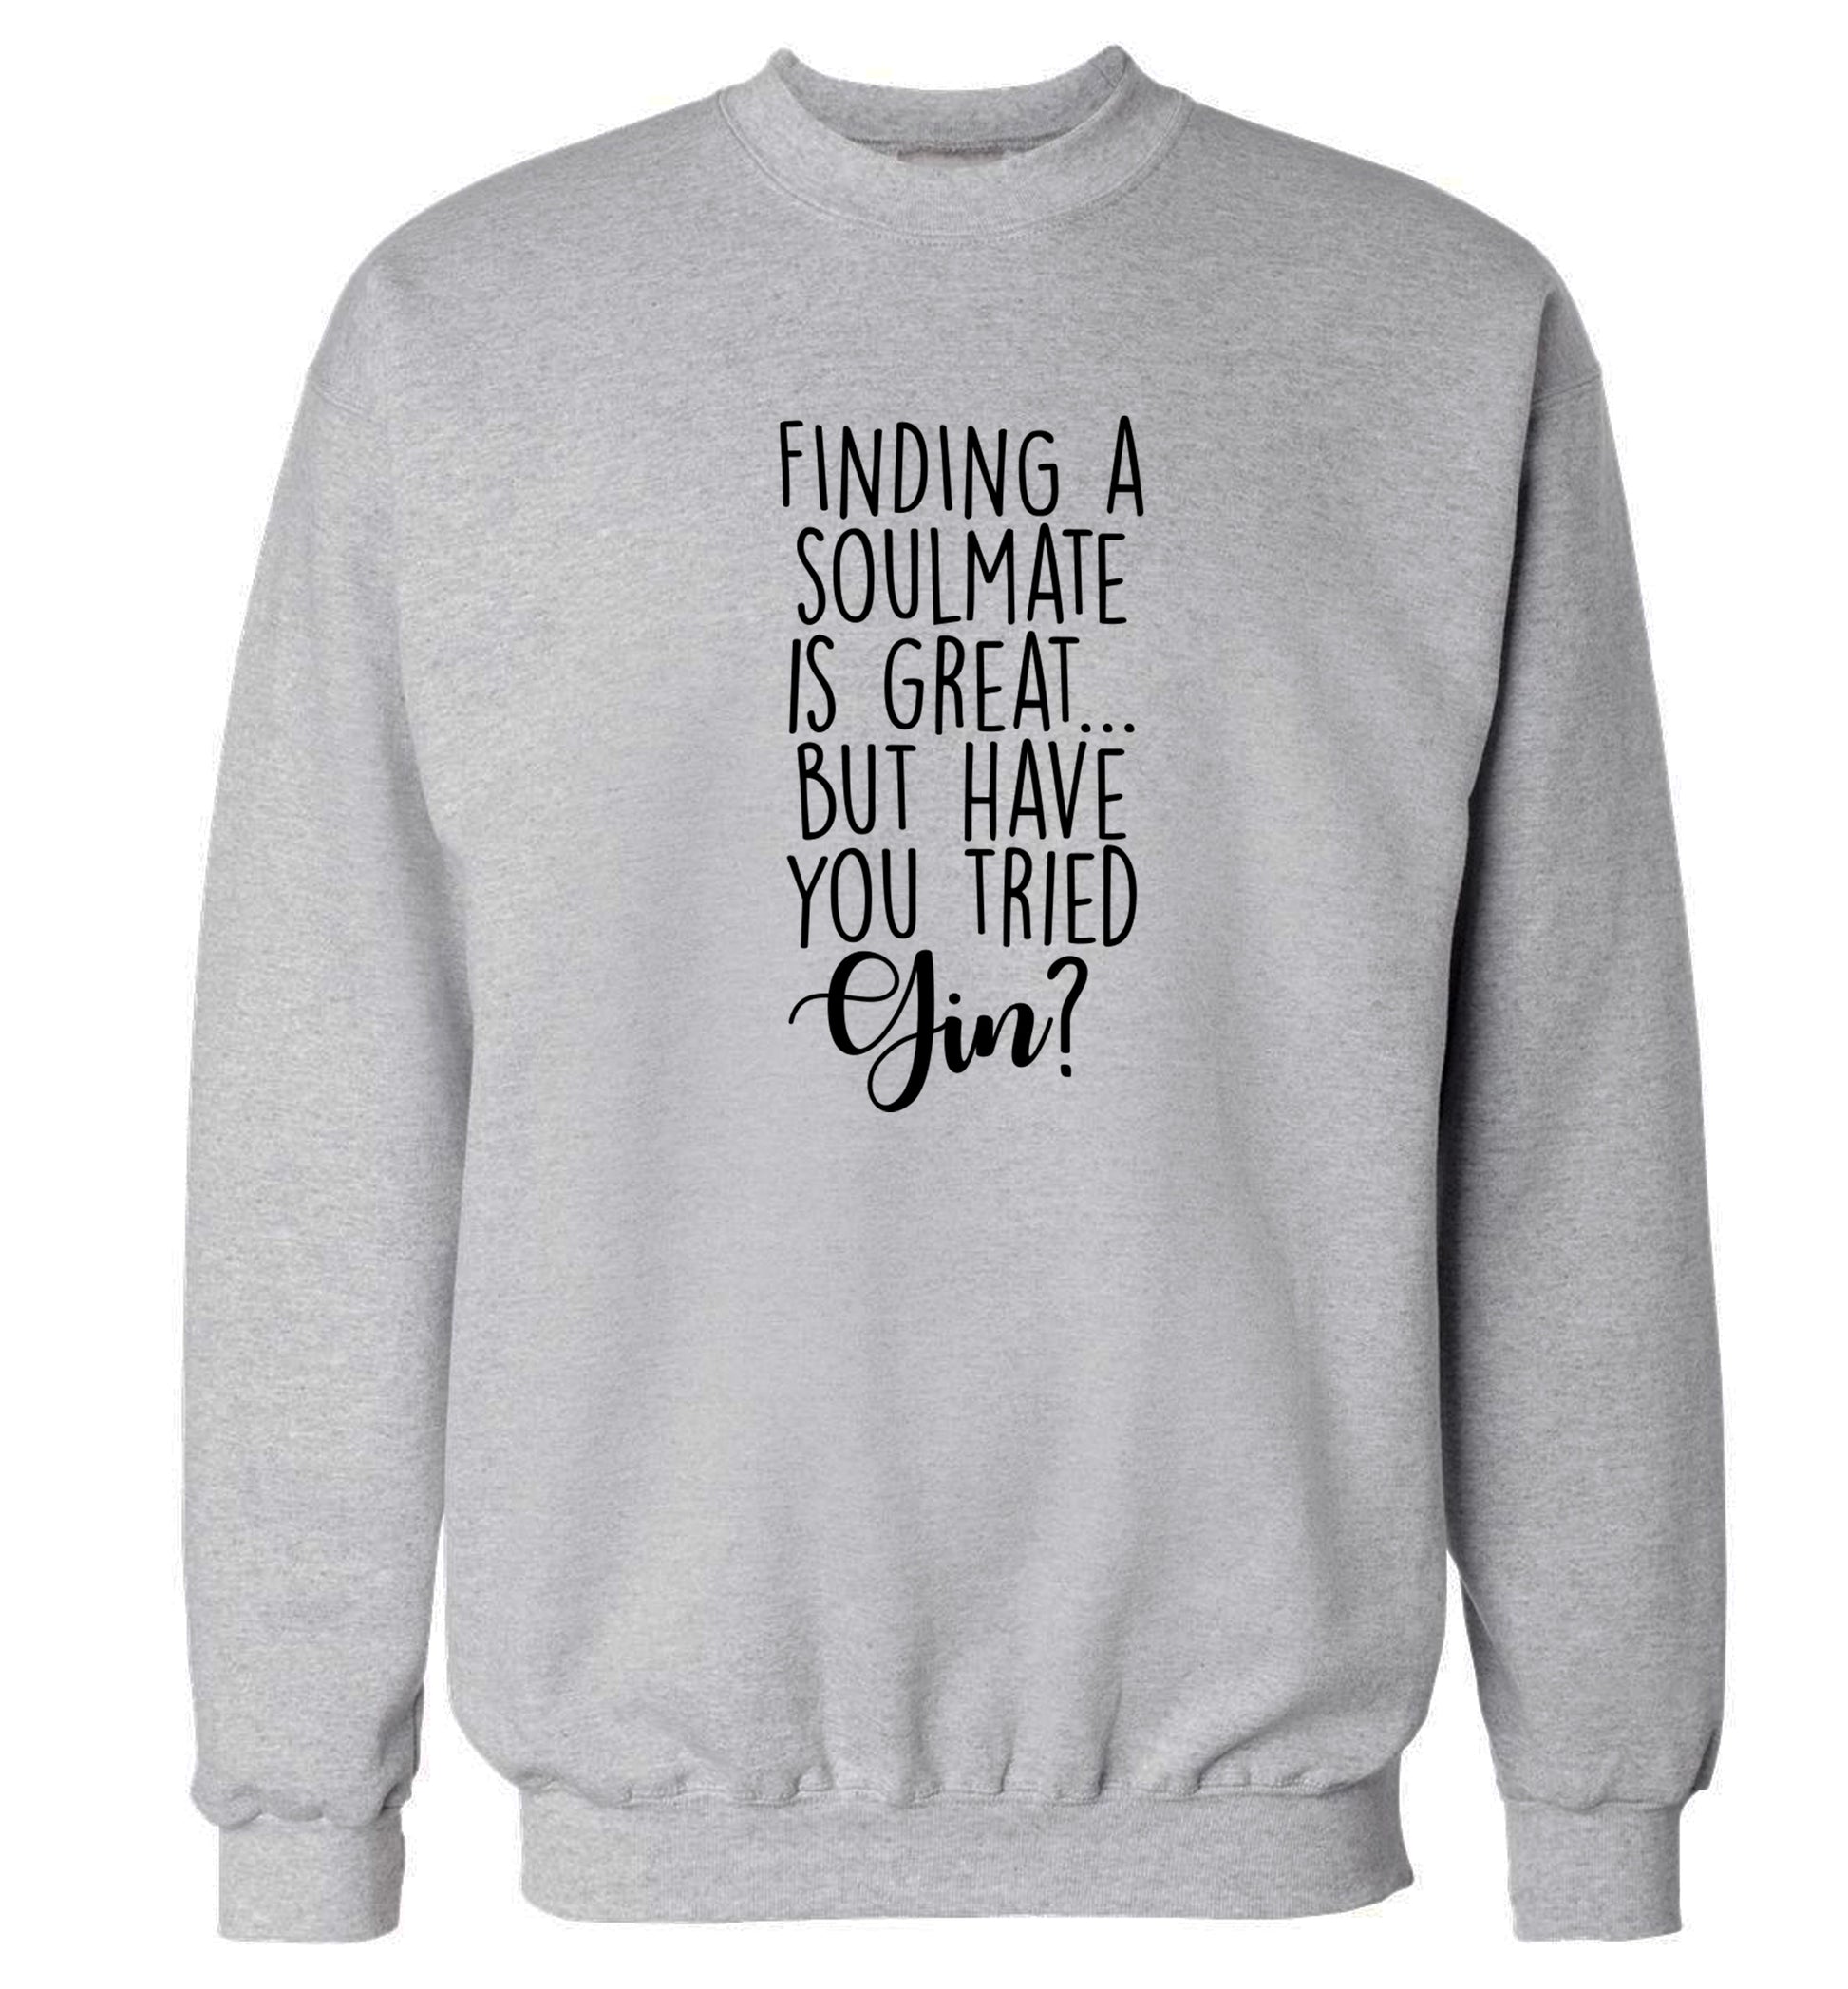 Finding a soulmate is great but have you tried gin? Adult's unisex grey Sweater 2XL